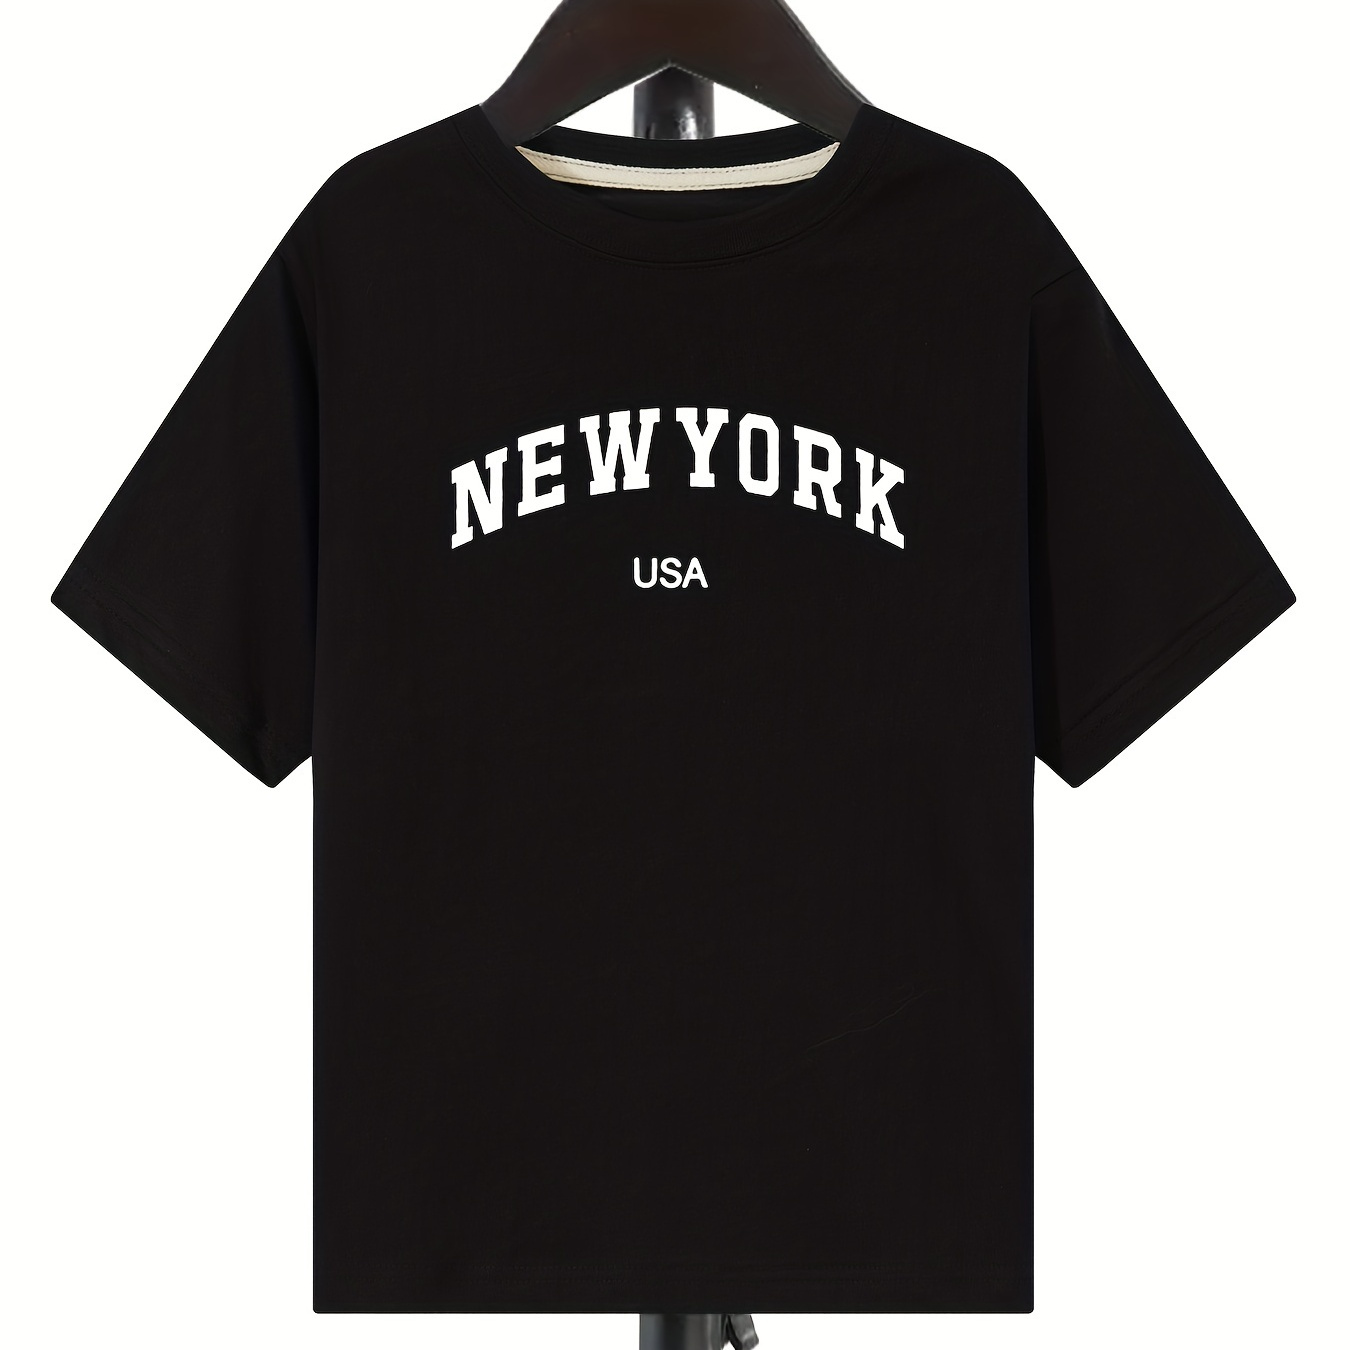 

New York Letter Print Boys Creative Cotton T-shirt, Casual Lightweight Comfy Short Sleeve Crew Neck Tee Tops, Kids Clothings For Summer